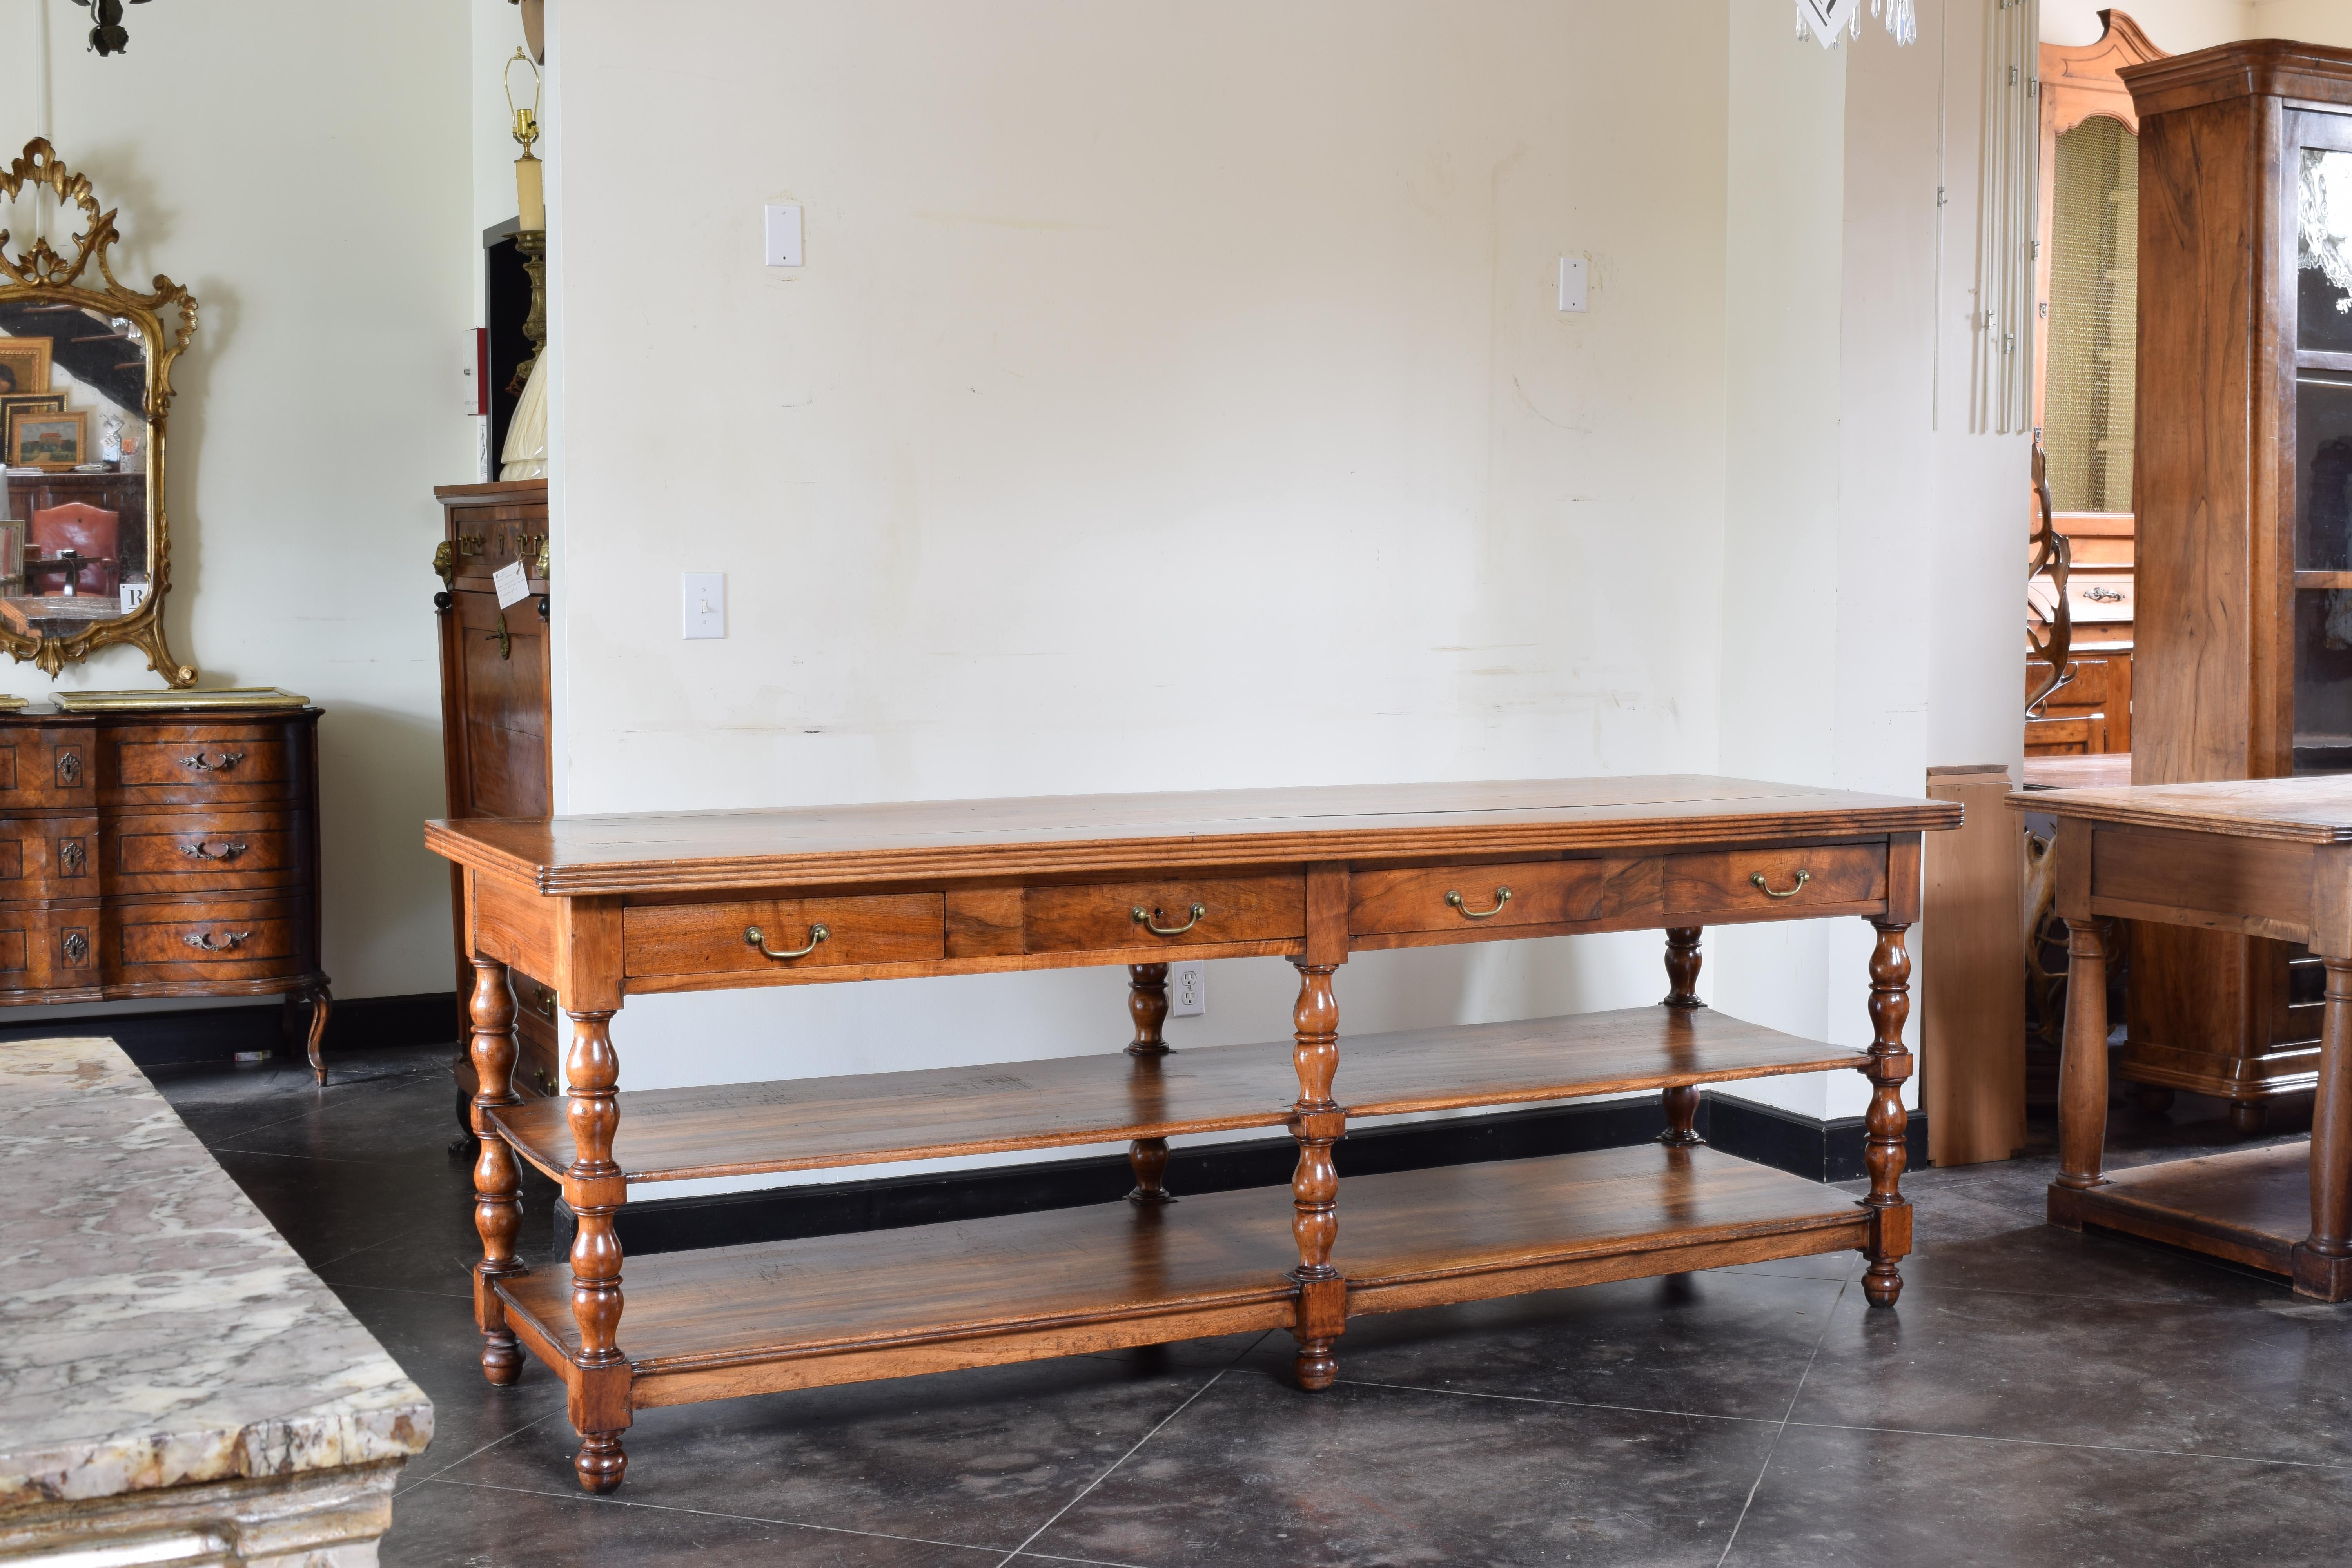 Having a thick rectangular top with quadruple molded edge, the moldings used as scissor guides for cutting fabric, the conforming case with 4 drawers retaining antique brass hardware, raised on beautifully turned and block legs terminating in acorn